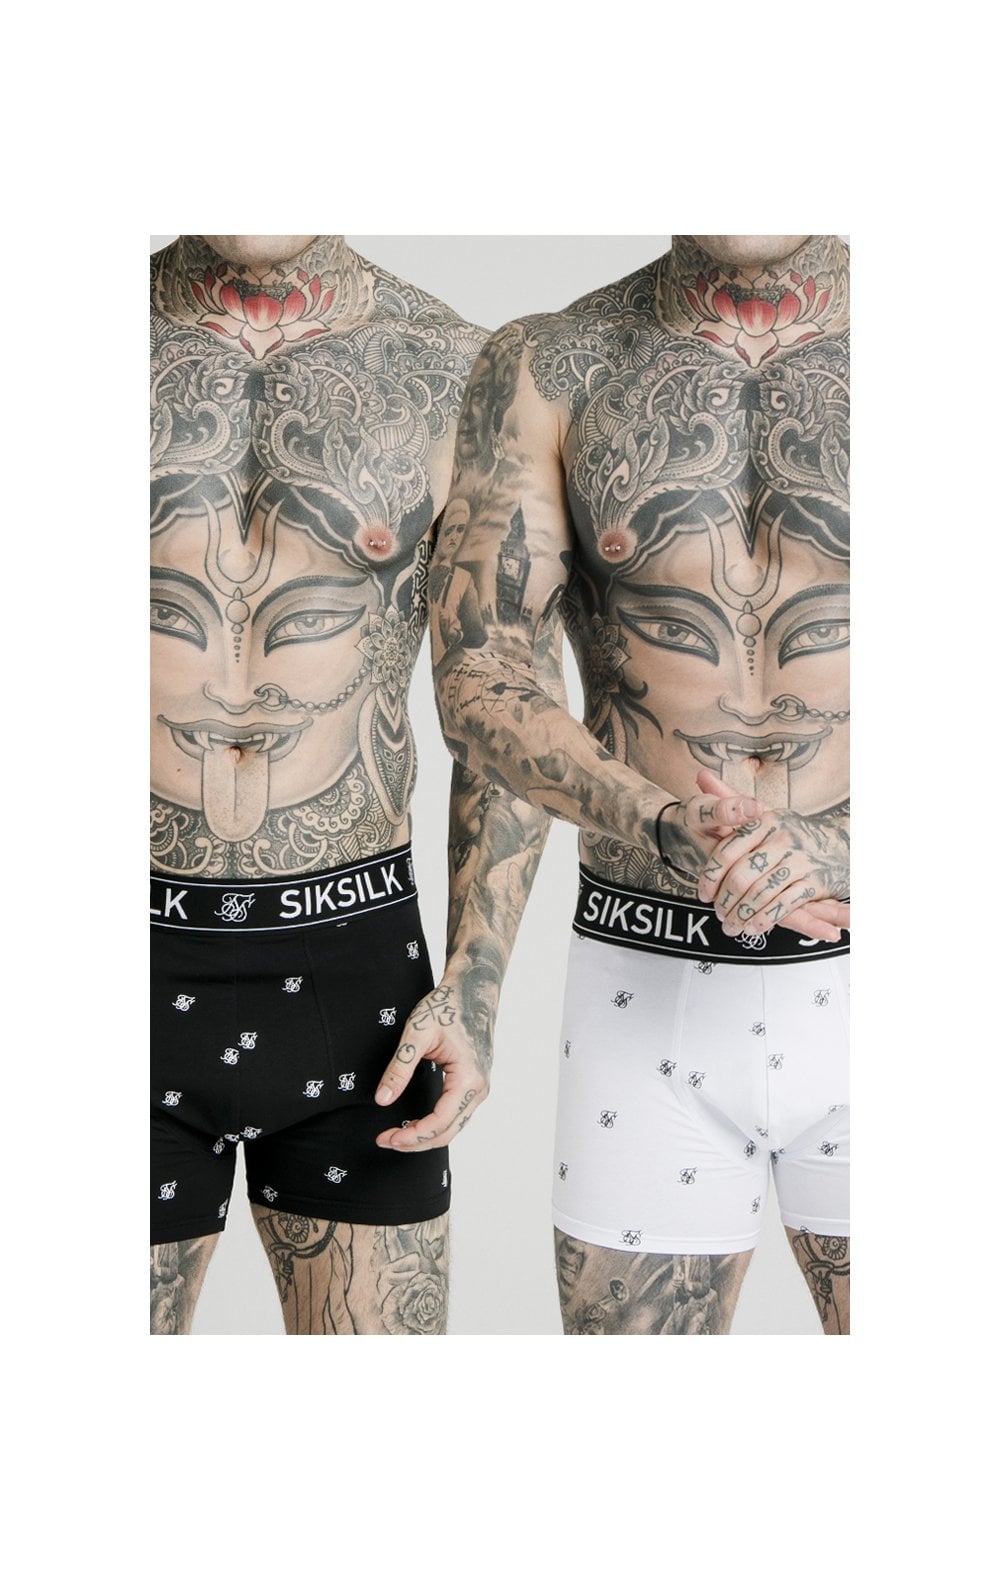 Load image into Gallery viewer, SikSilk Logo Taped Boxer Shorts (2 Pack) - White &amp; Black Pack of 2 Boxers - 1 White pair and 1 Black pair